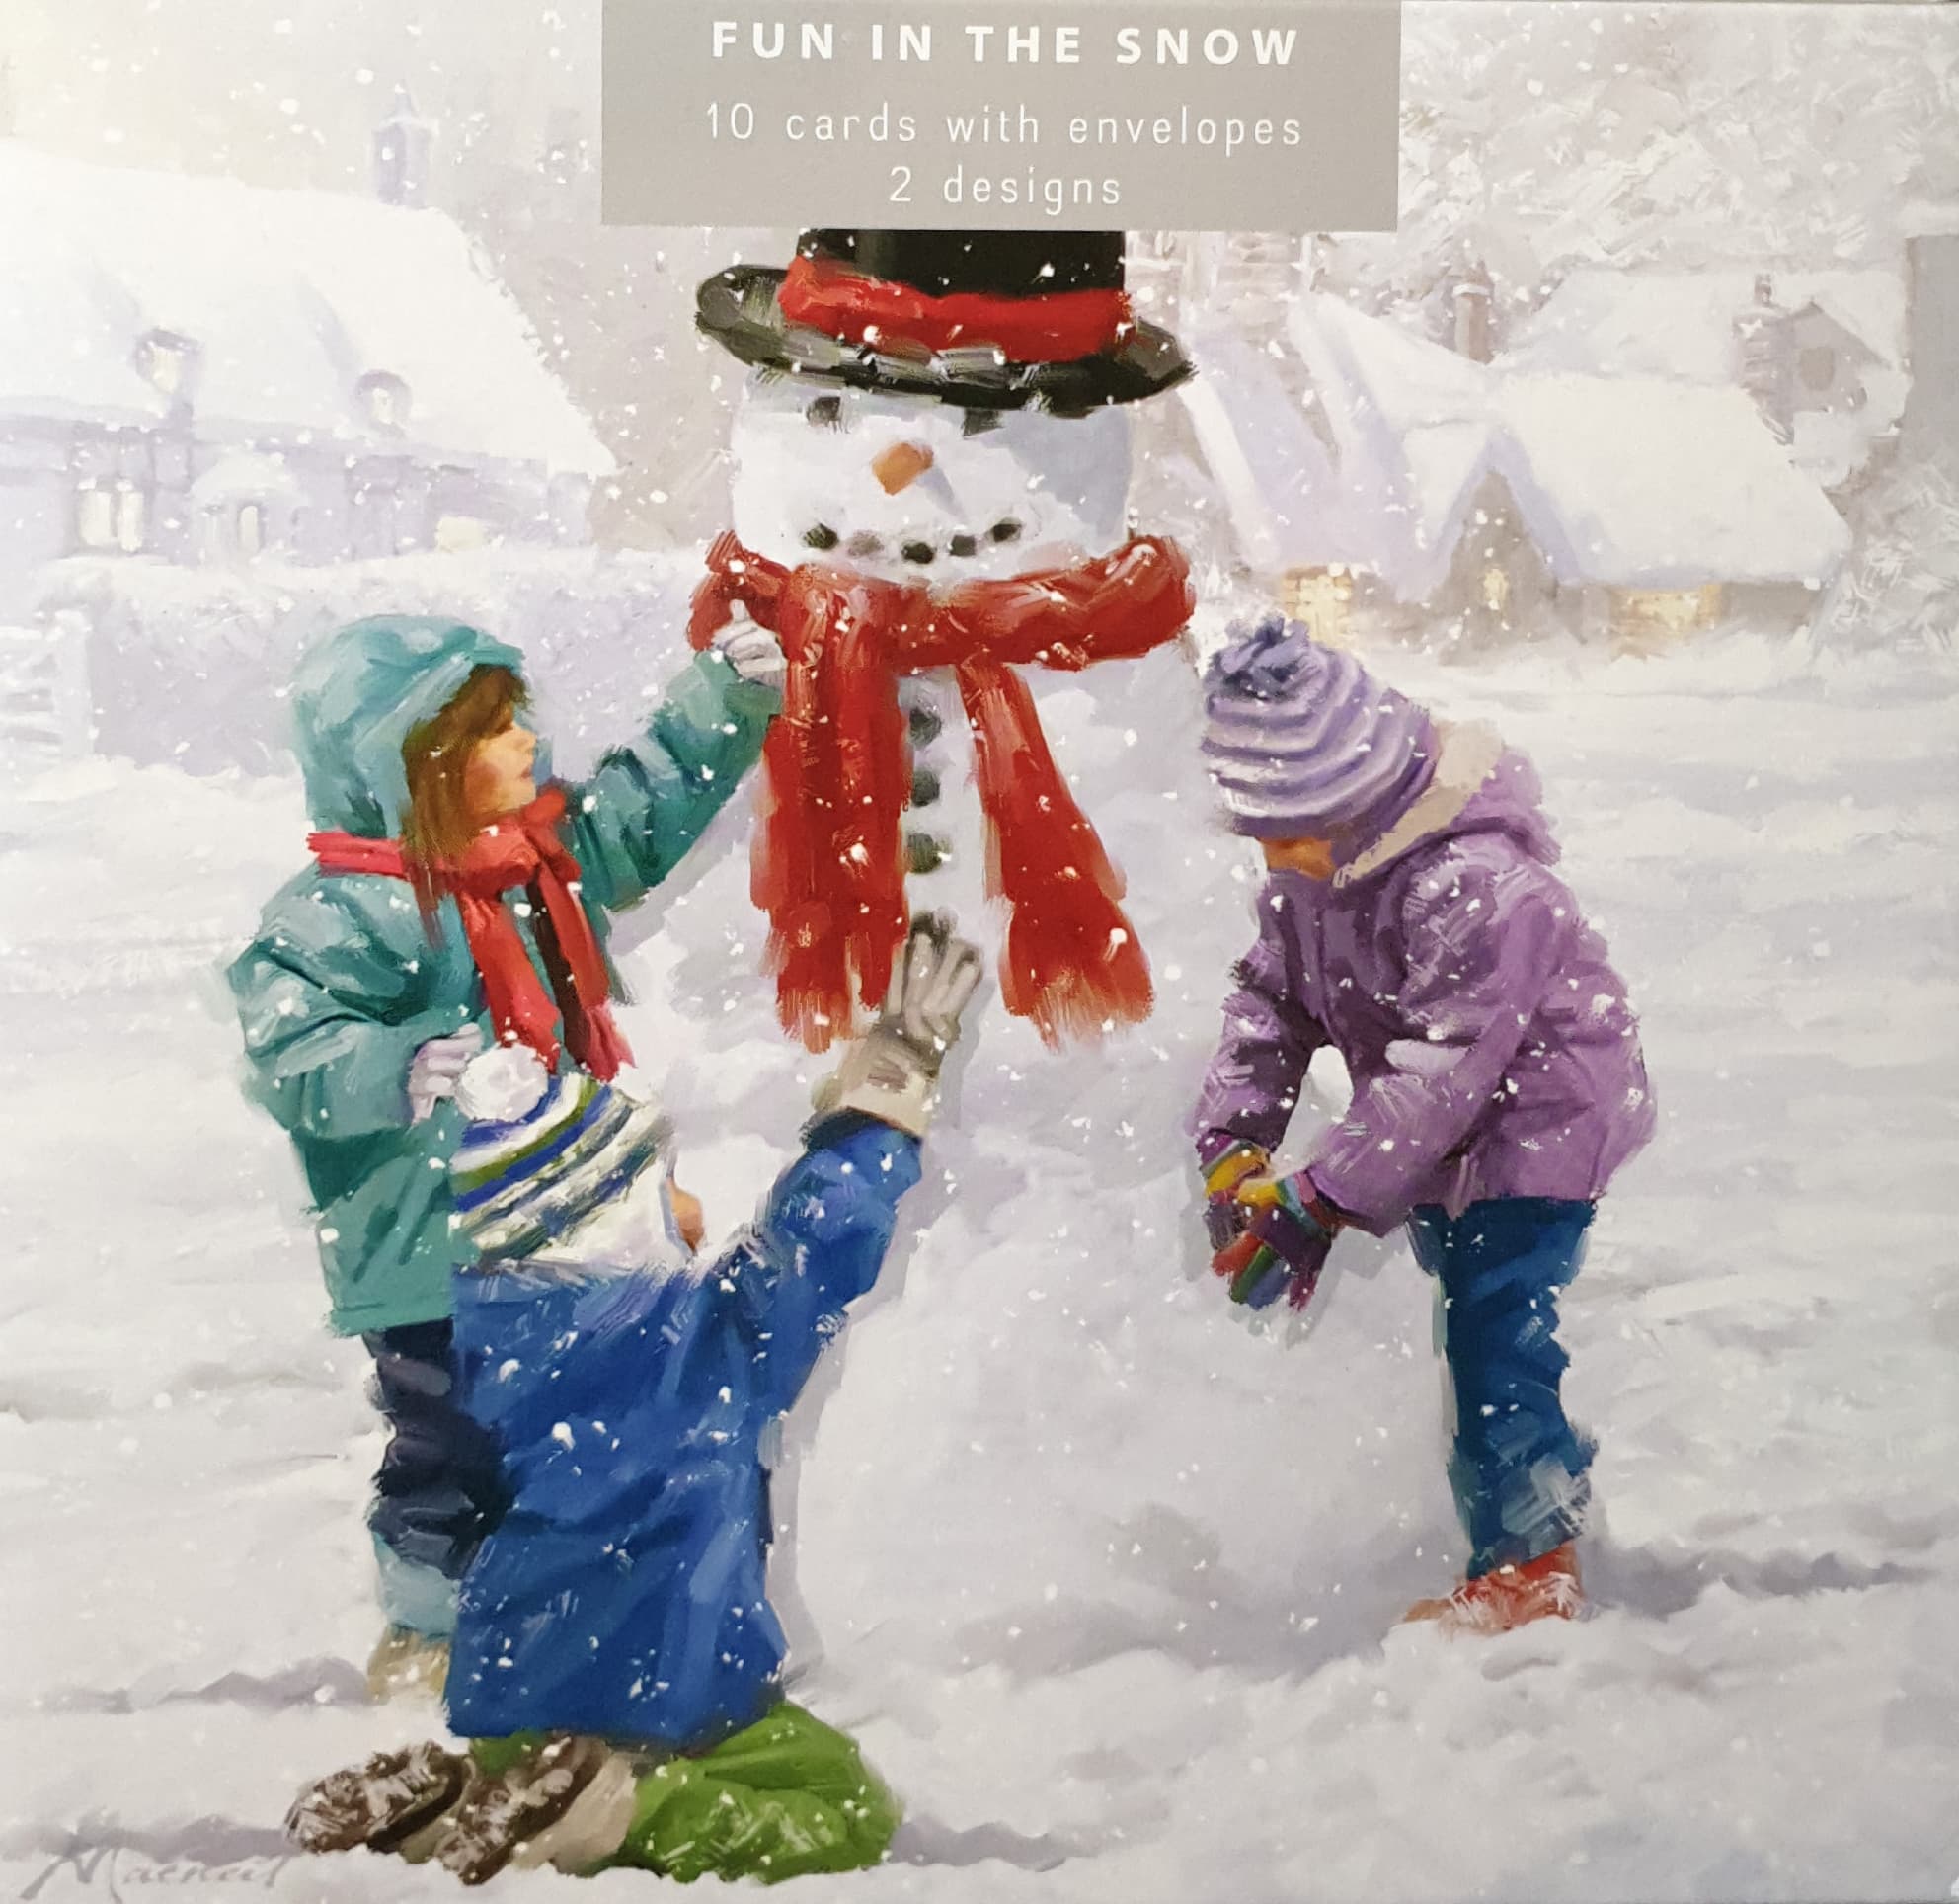 Charity Christmas Cards - 10 Cards with Envelopes / 2 Designs - Fun in the Snow